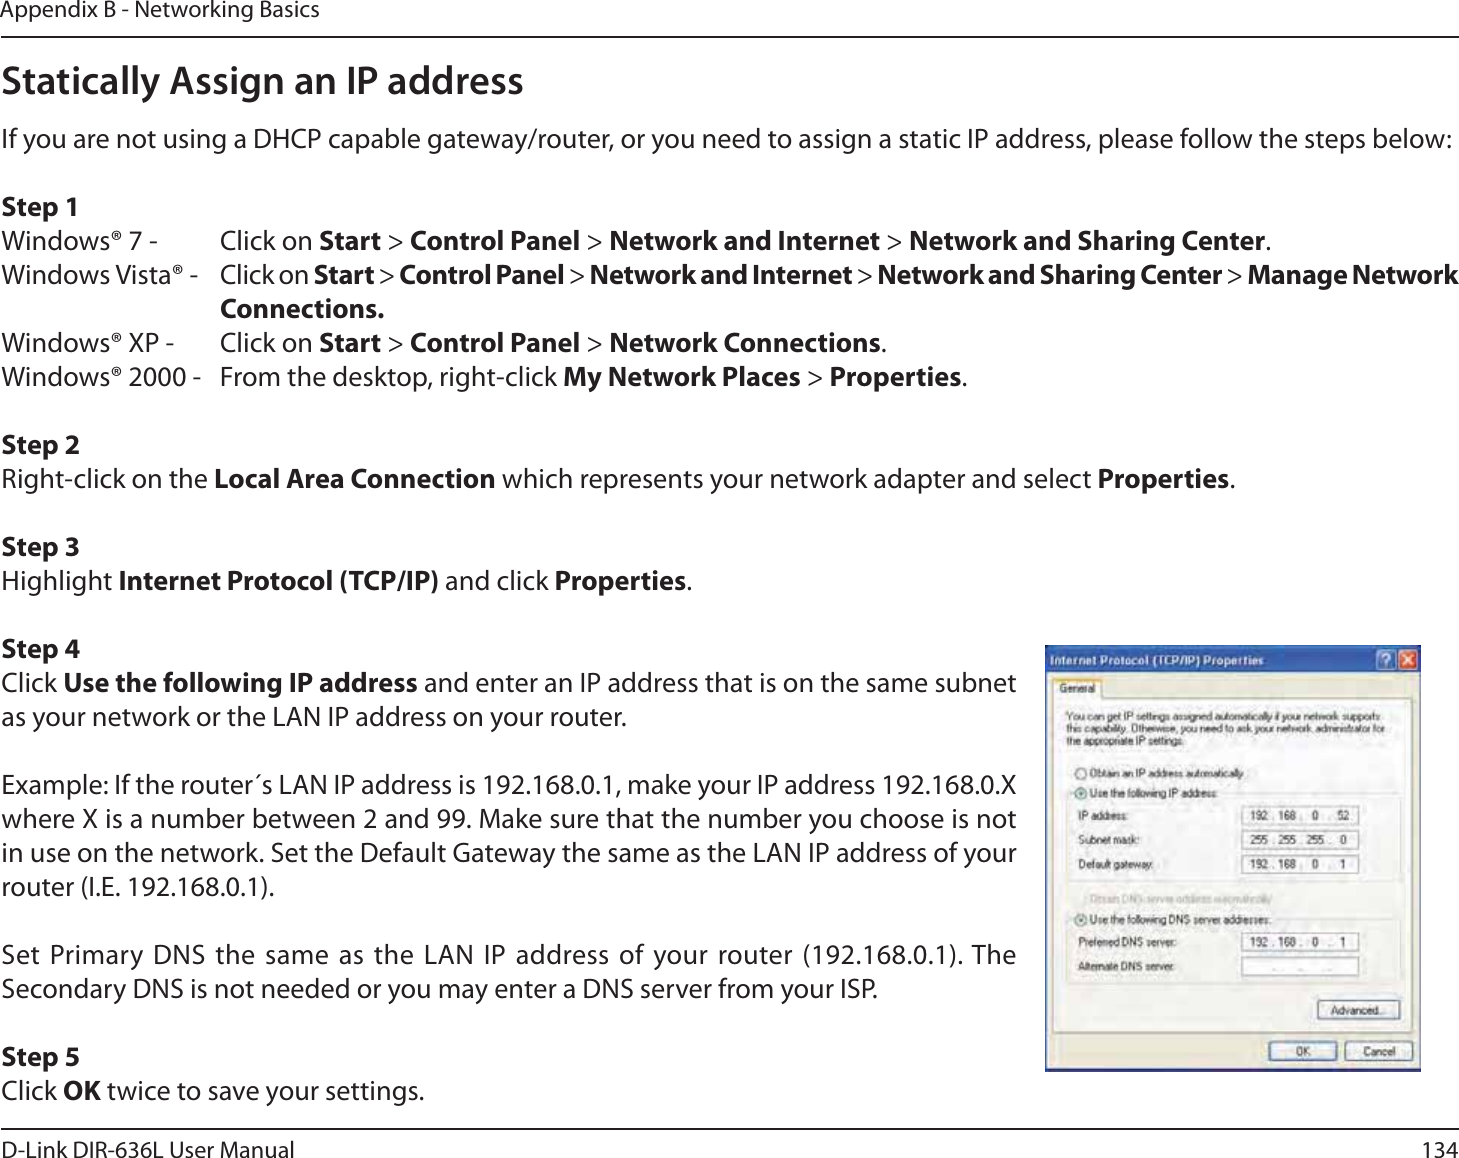 134D-Link DIR-636L User ManualAppendix B - Networking BasicsStatically Assign an IP addressIf you are not using a DHCP capable gateway/router, or you need to assign a static IP address, please follow the steps below:Step 1Windows® 7 -  Click on Start &gt; Control Panel &gt; Network and Internet &gt; Network and Sharing Center.Windows Vista® -  Click on Start &gt; Control Panel &gt; Network and Internet &gt; Network and Sharing Center &gt; Manage Network     Connections.Windows® XP -  Click on Start &gt; Control Panel &gt; Network Connections.Windows® 2000 -  From the desktop, right-click My Network Places &gt; Properties.Step 2Right-click on the Local Area Connection which represents your network adapter and select Properties.Step 3Highlight Internet Protocol (TCP/IP) and click Properties.Step 4Click Use the following IP address and enter an IP address that is on the same subnet as your network or the LAN IP address on your router. Example: If the router´s LAN IP address is 192.168.0.1, make your IP address 192.168.0.X where X is a number between 2 and 99. Make sure that the number you choose is not in use on the network. Set the Default Gateway the same as the LAN IP address of your router (I.E. 192.168.0.1). Set Primary DNS the same as the LAN IP address of your router (192.168.0.1). The Secondary DNS is not needed or you may enter a DNS server from your ISP.Step 5Click OK twice to save your settings.